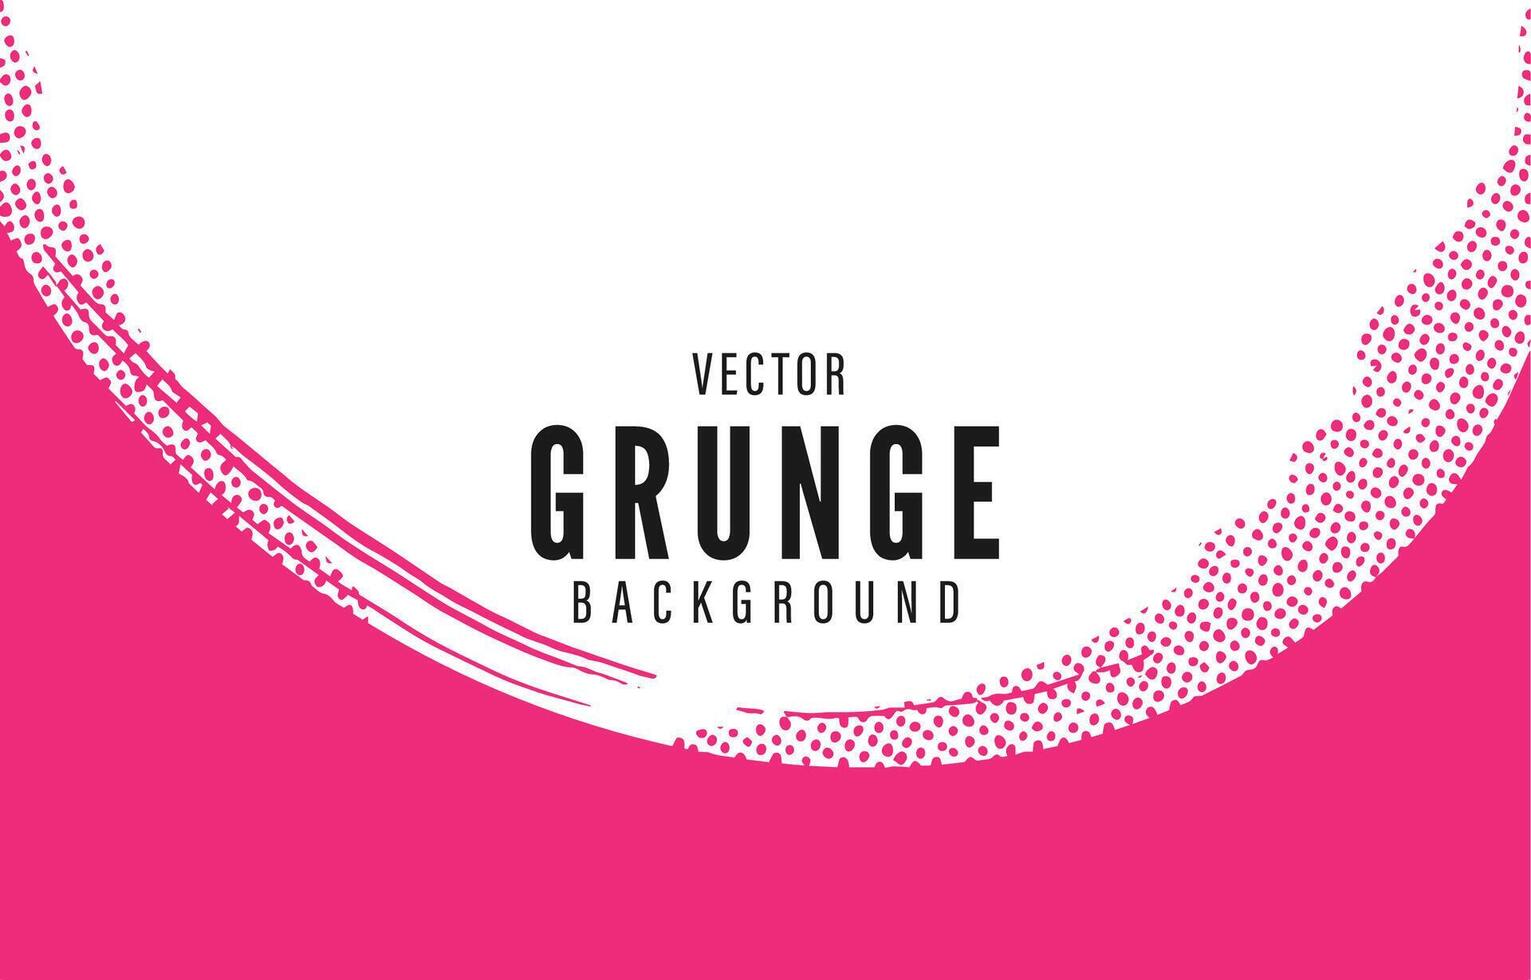 Grunge with halftone detailed background vector